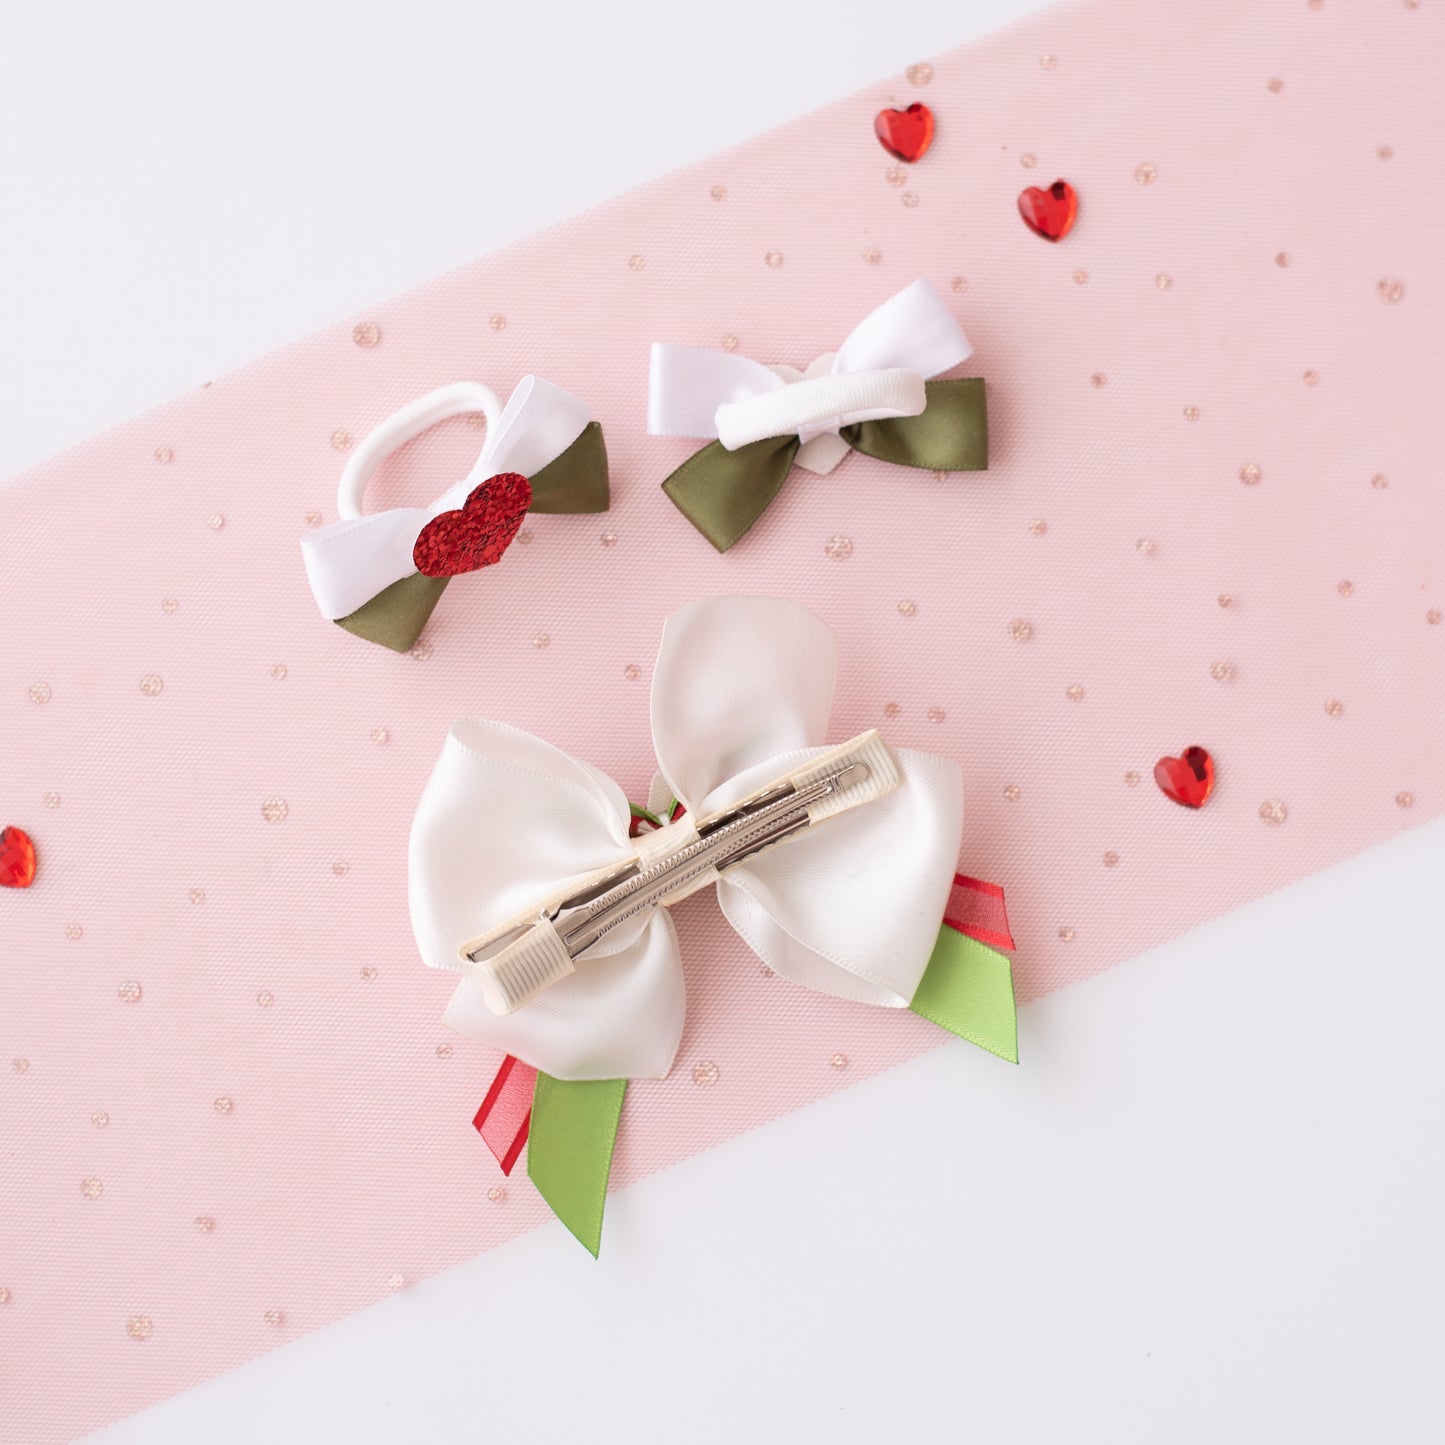 Combo : Set of 1 pair white rubberbands with a glitter heart and 1 elegant bow with glitter star. - White, Red, Green